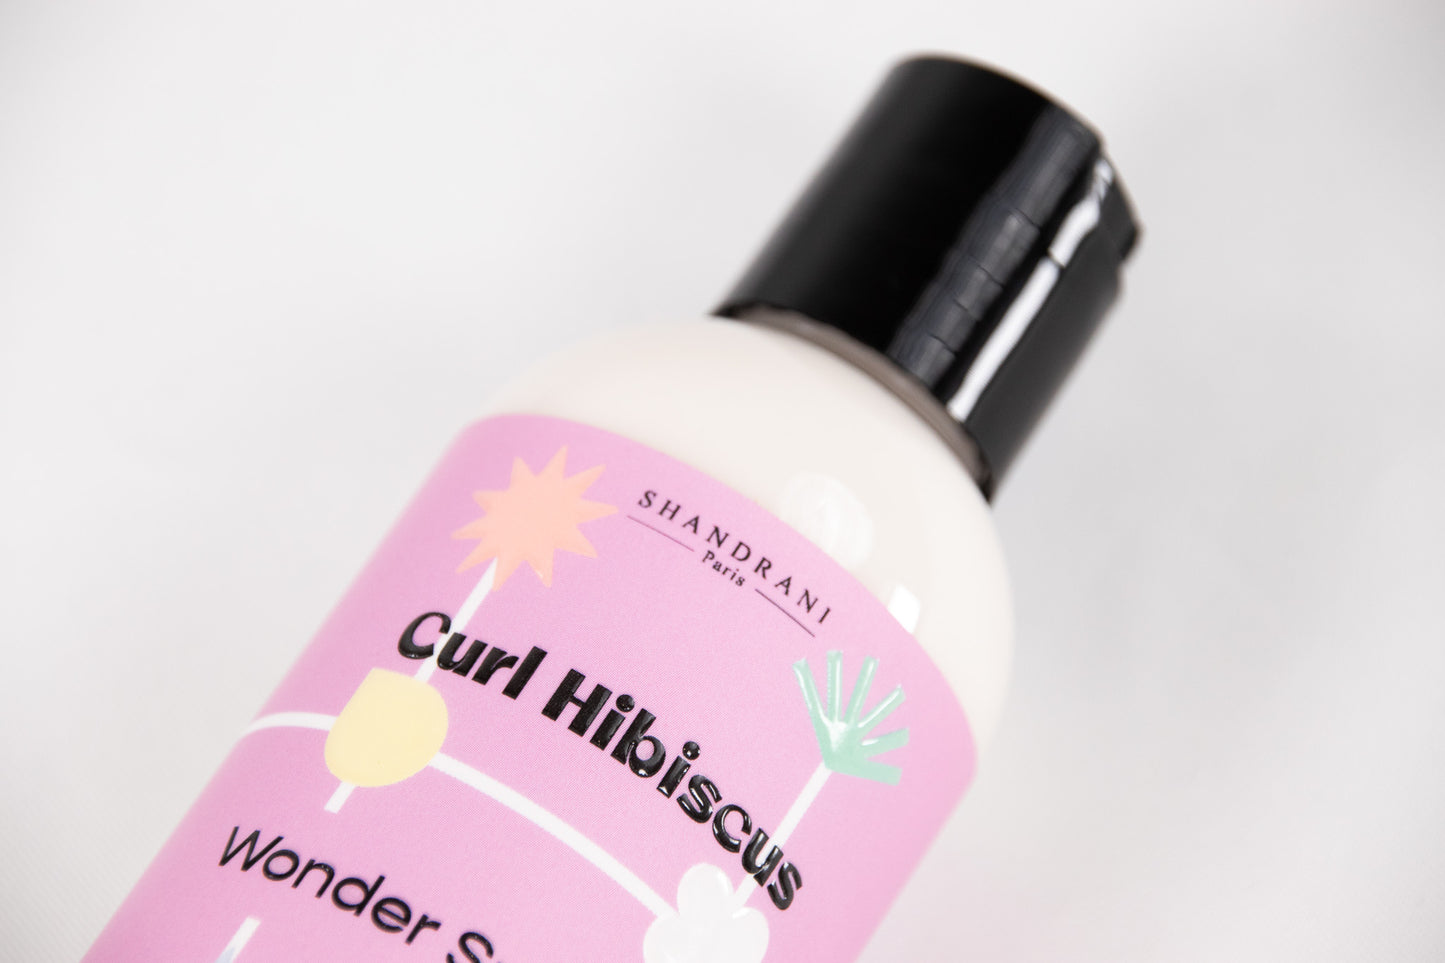 Antidote Curl Hibiscus Complete Routine